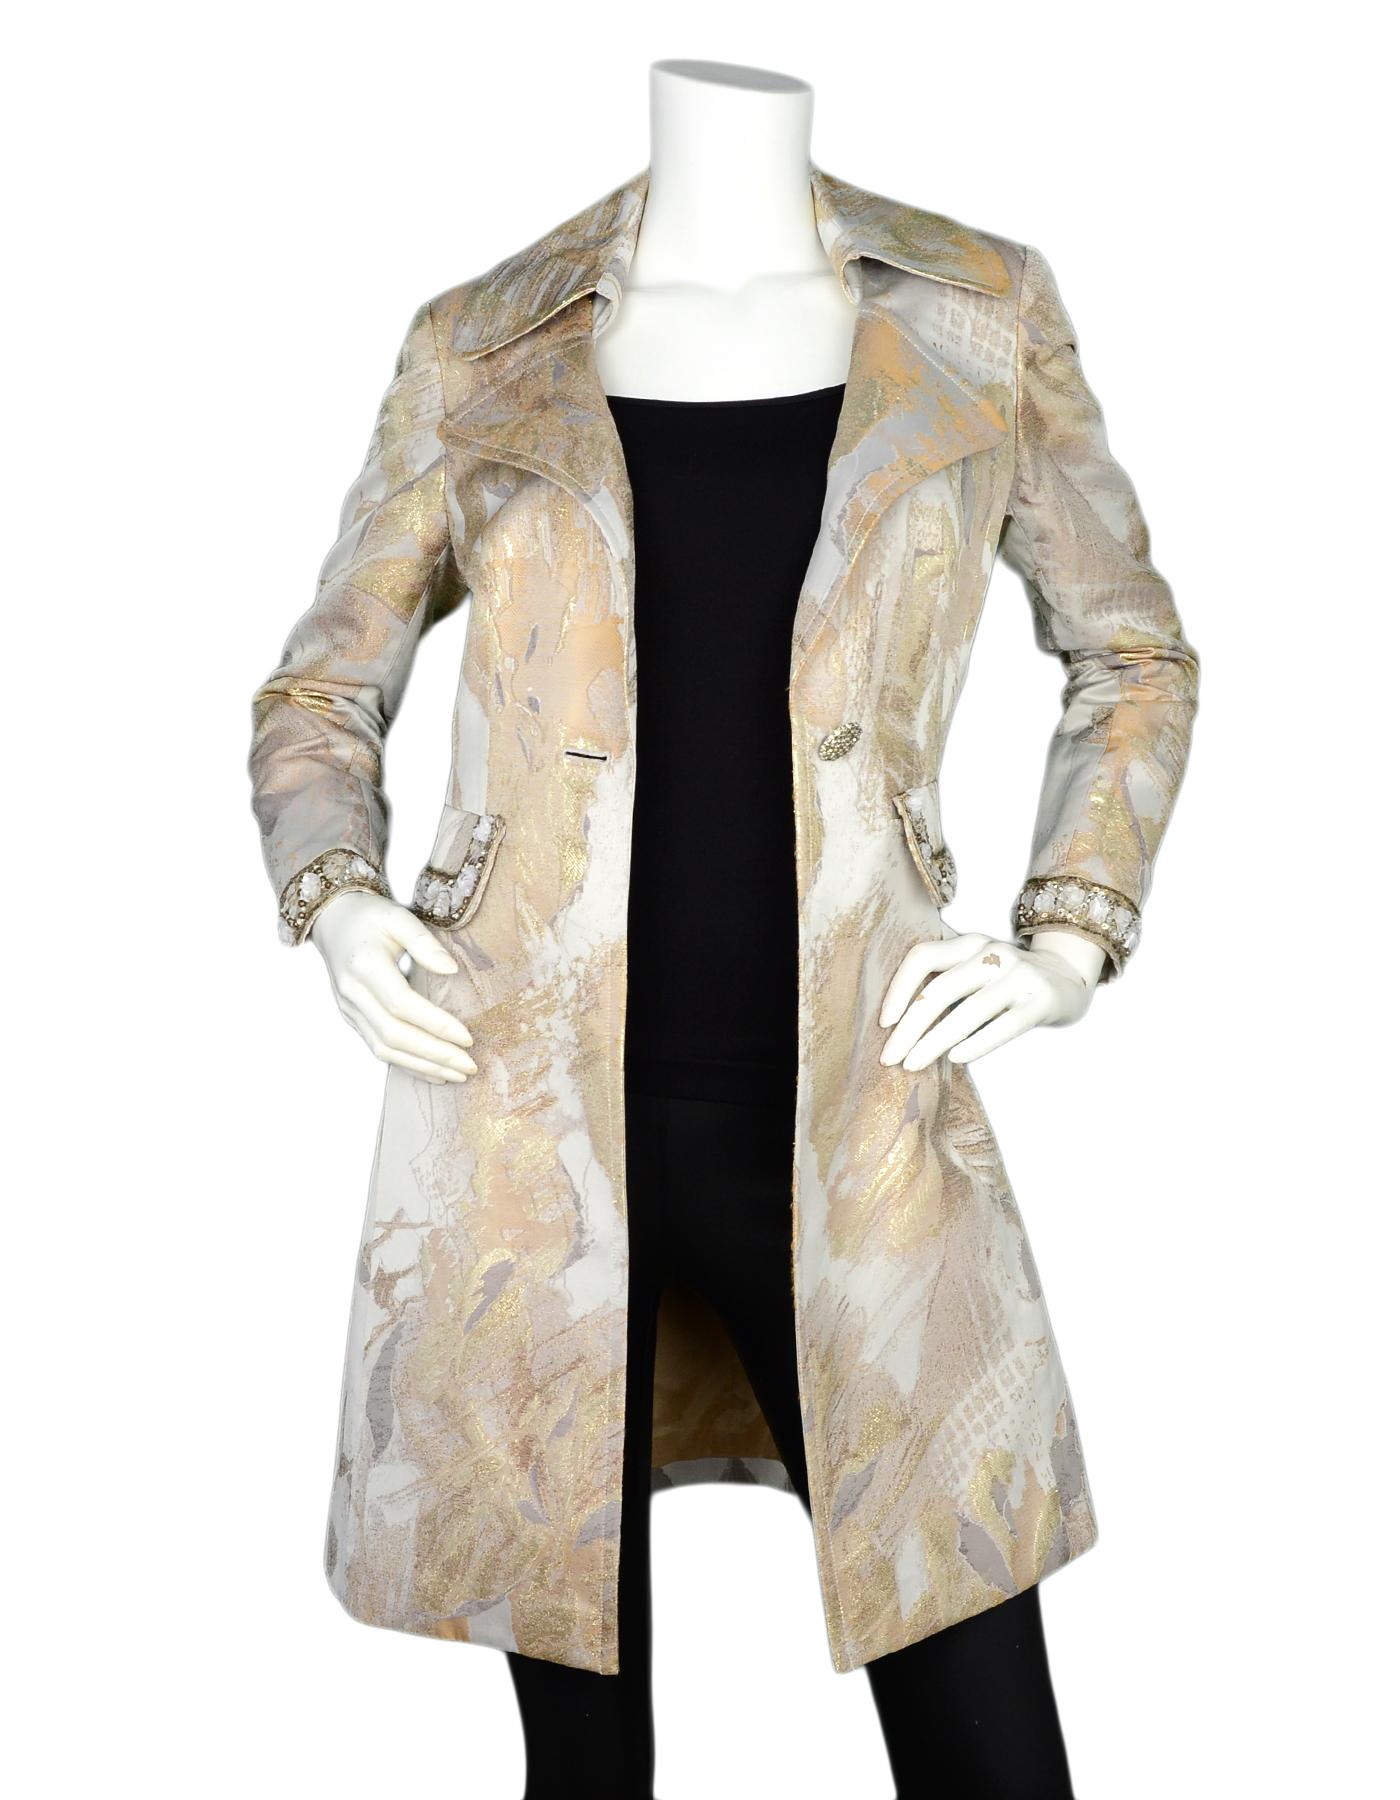 St. John Couture Grey/Gold Metallic Jacquard Coat W/ Crystal Button & Beaded Trim Sz 2

Made In: China
Color: Grey/gold
Materials: 58% acetate, 42% polyester
Lining: 68% acetate, 32% polyester
Opening/Closure: Crystal button 
Overall Condition: